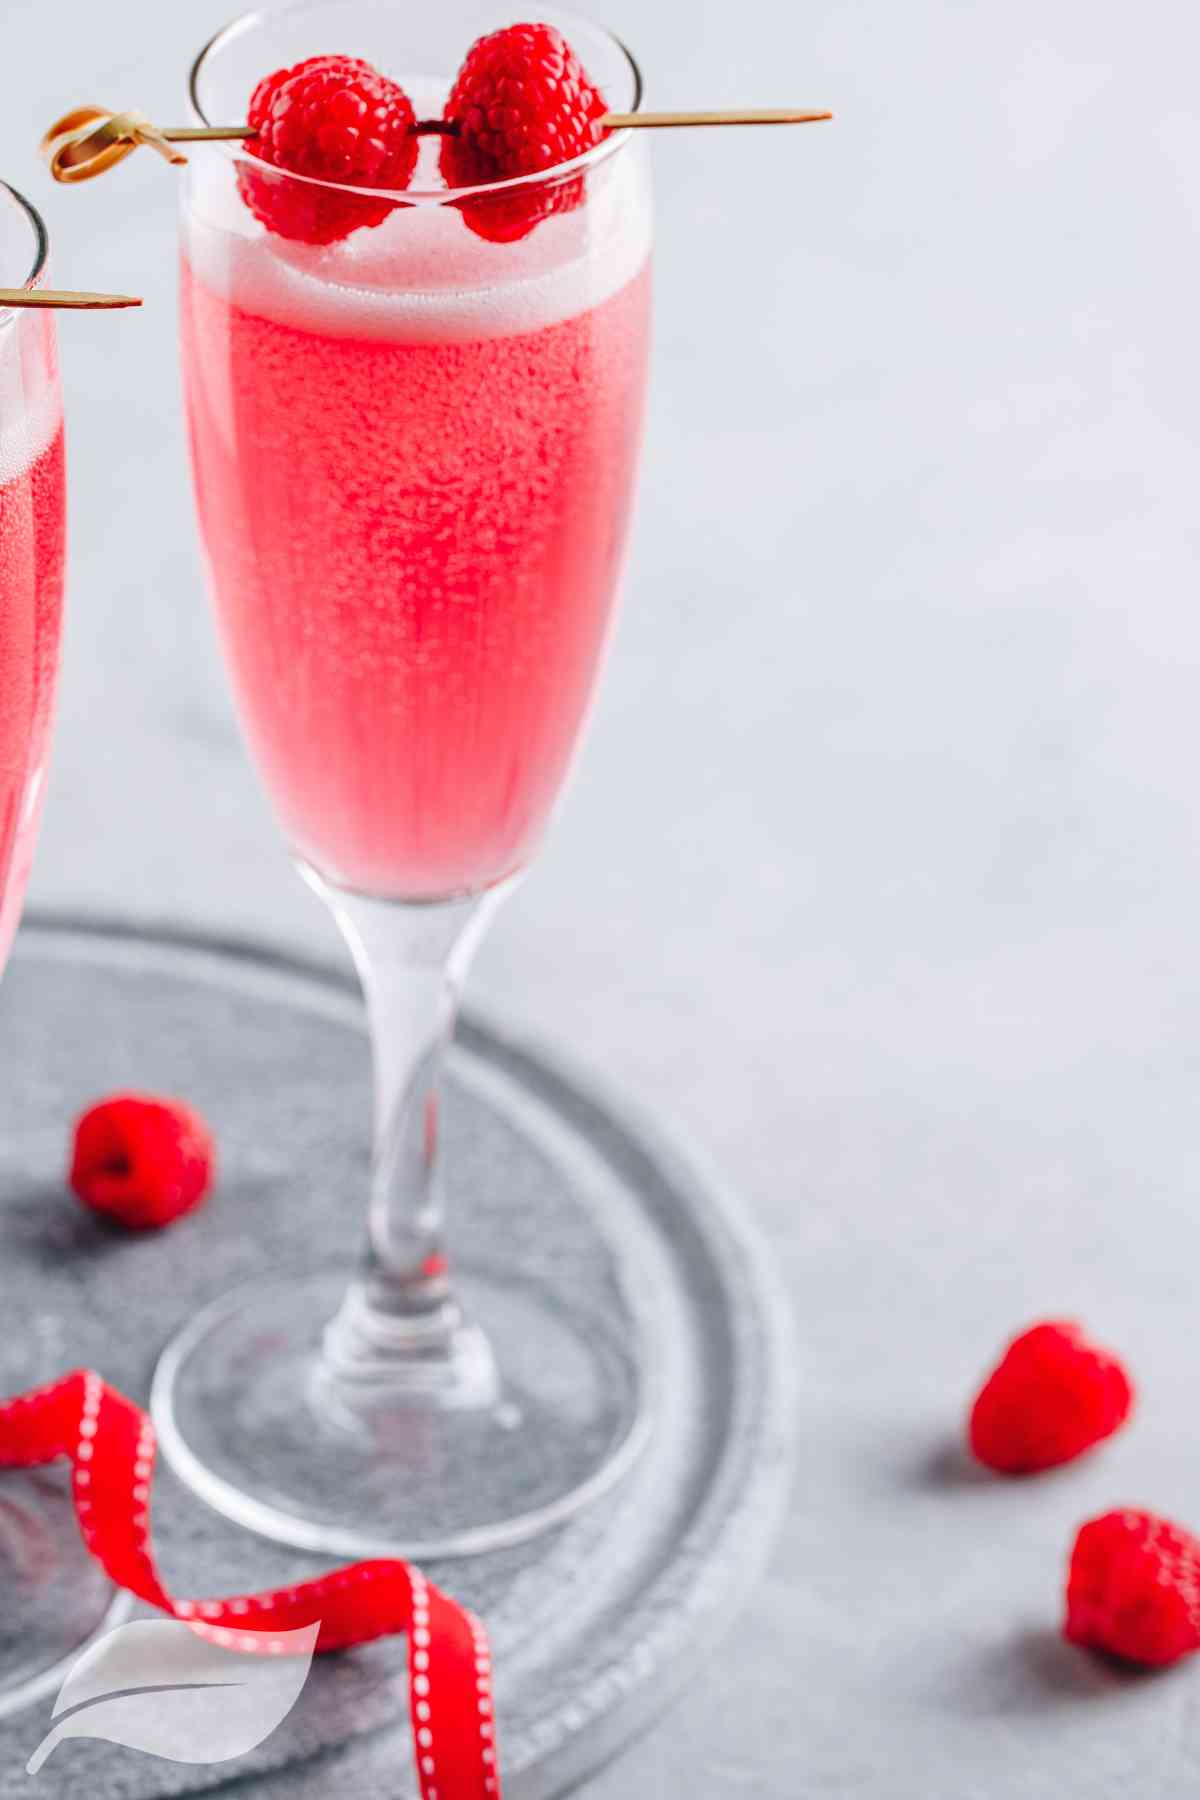 Cocktail recipes with prosecco